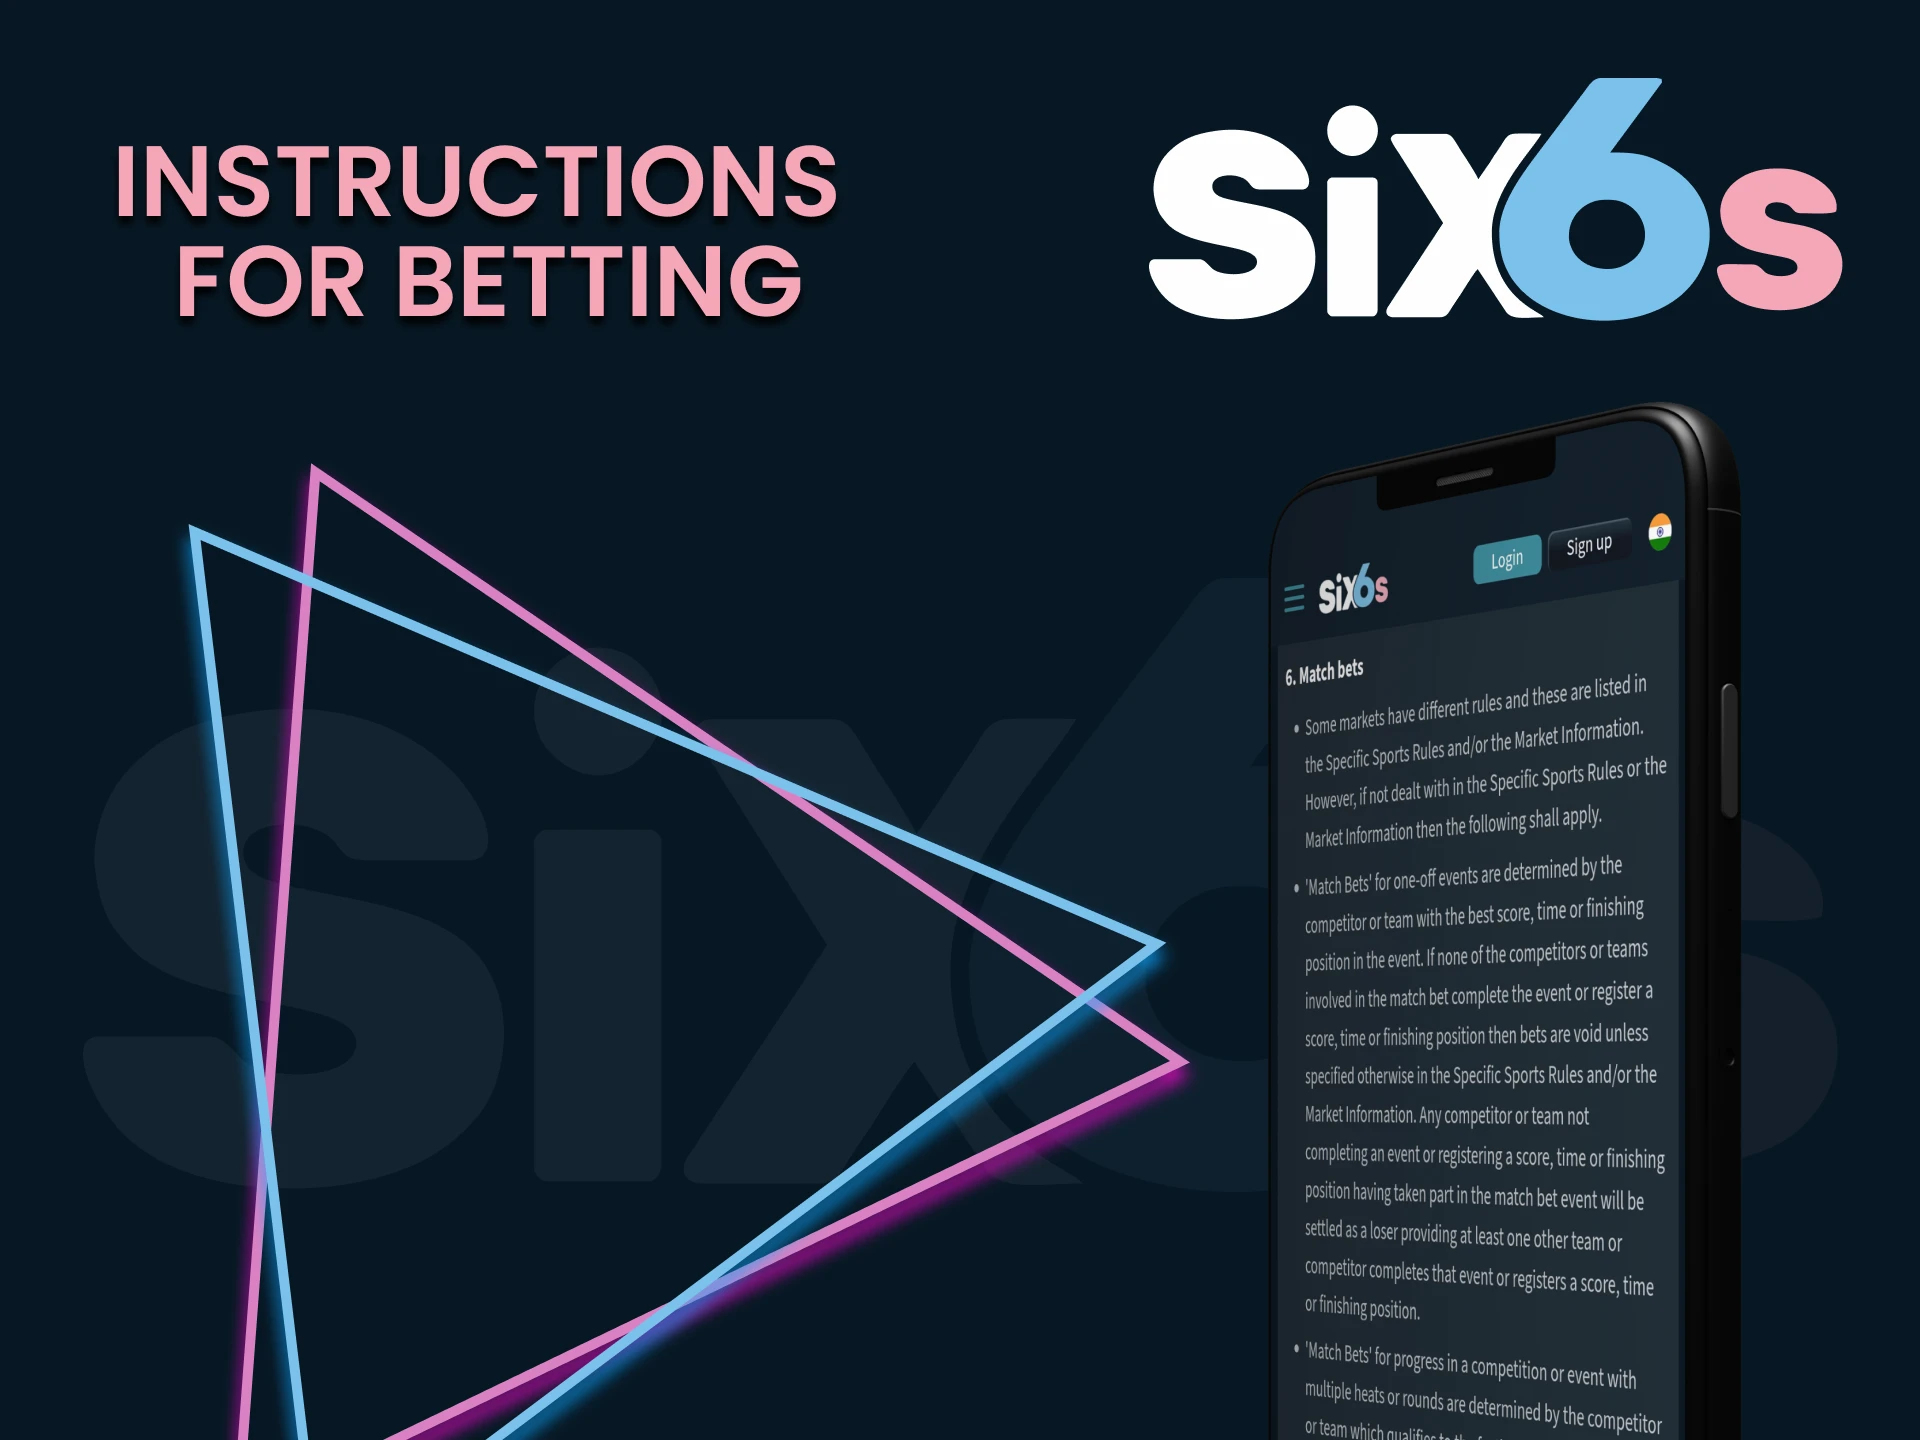 We will tell you all about how to bet on Six6s.